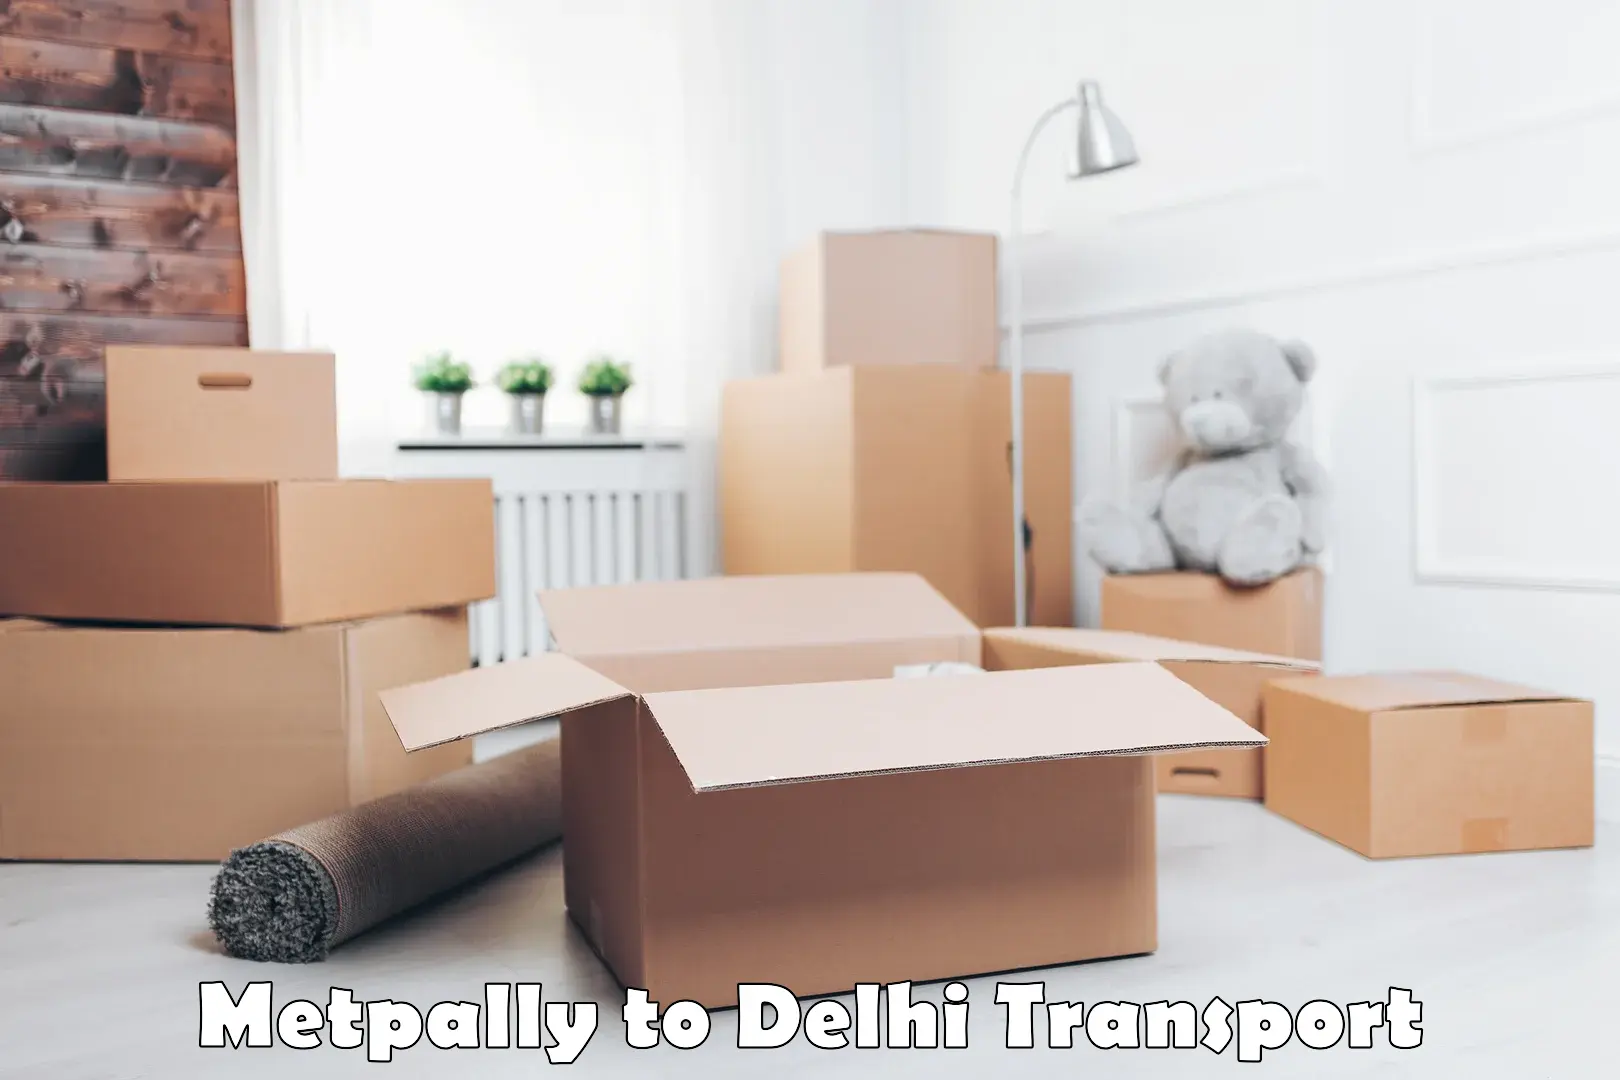 Goods delivery service Metpally to Lodhi Road